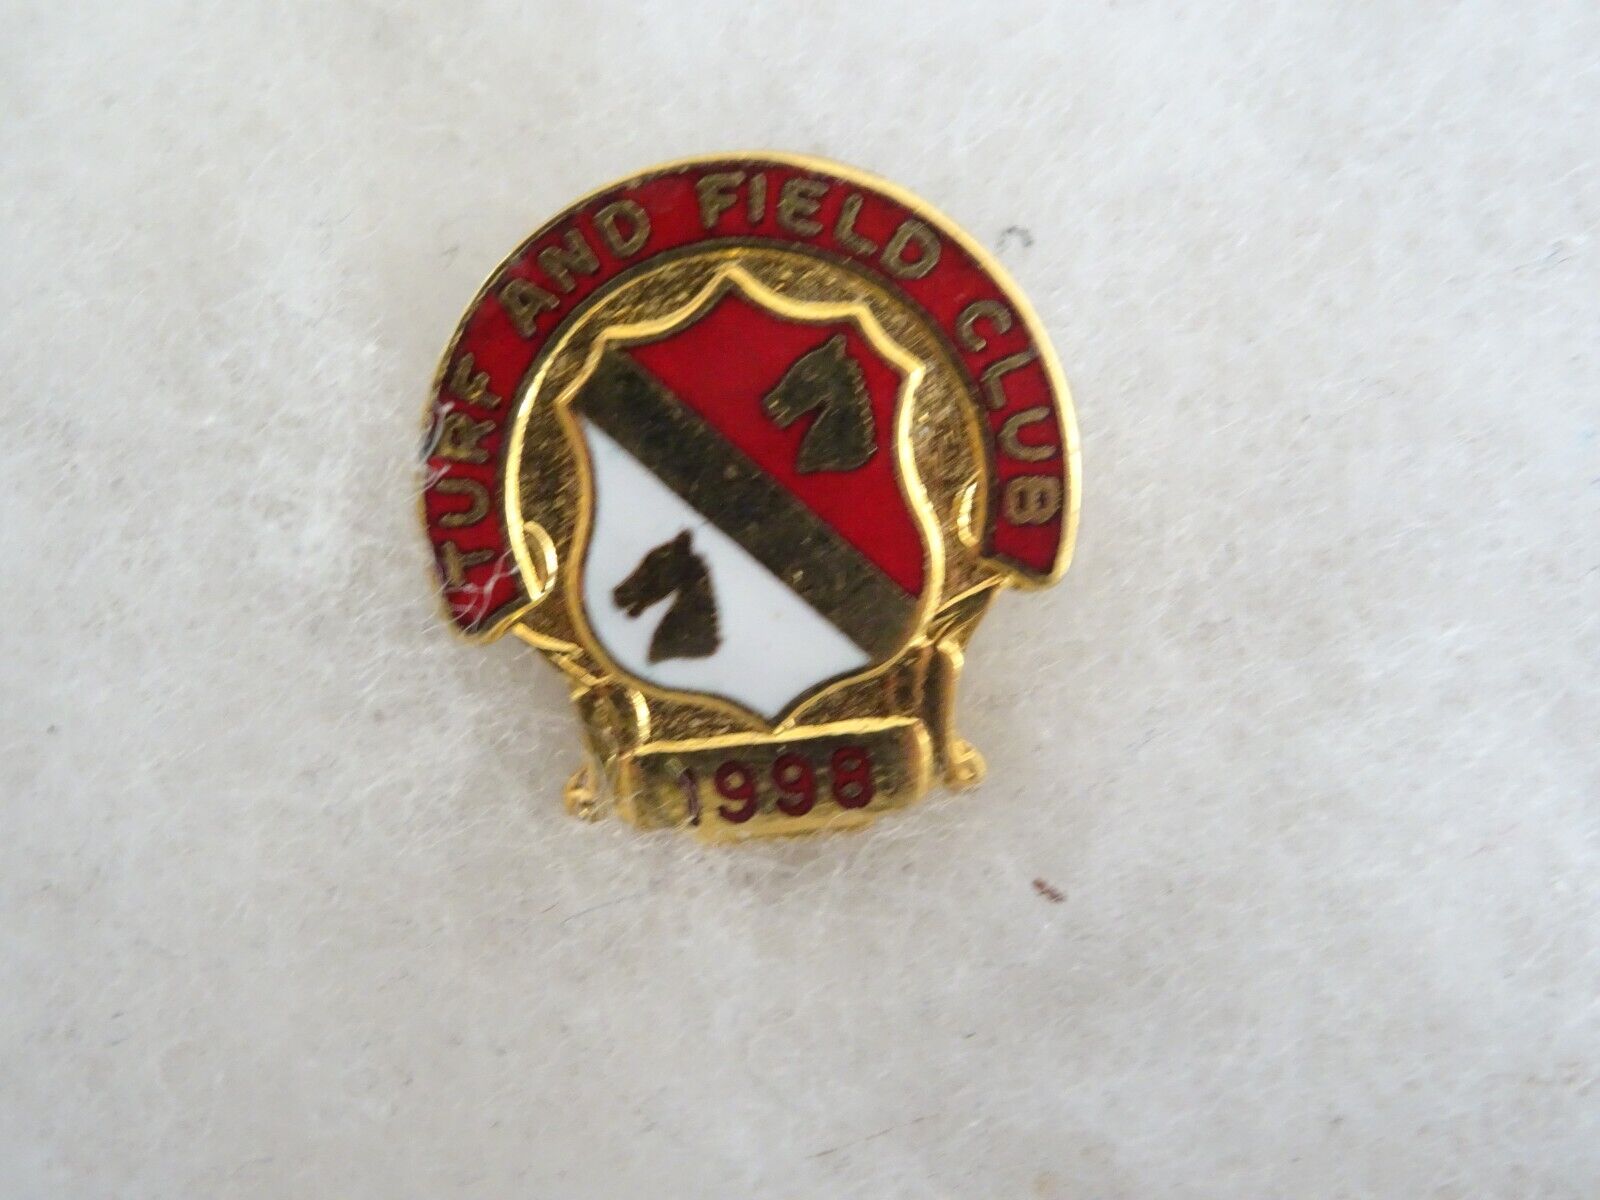 Vintage Turf and Field Club 1998 Belmont, NY pin